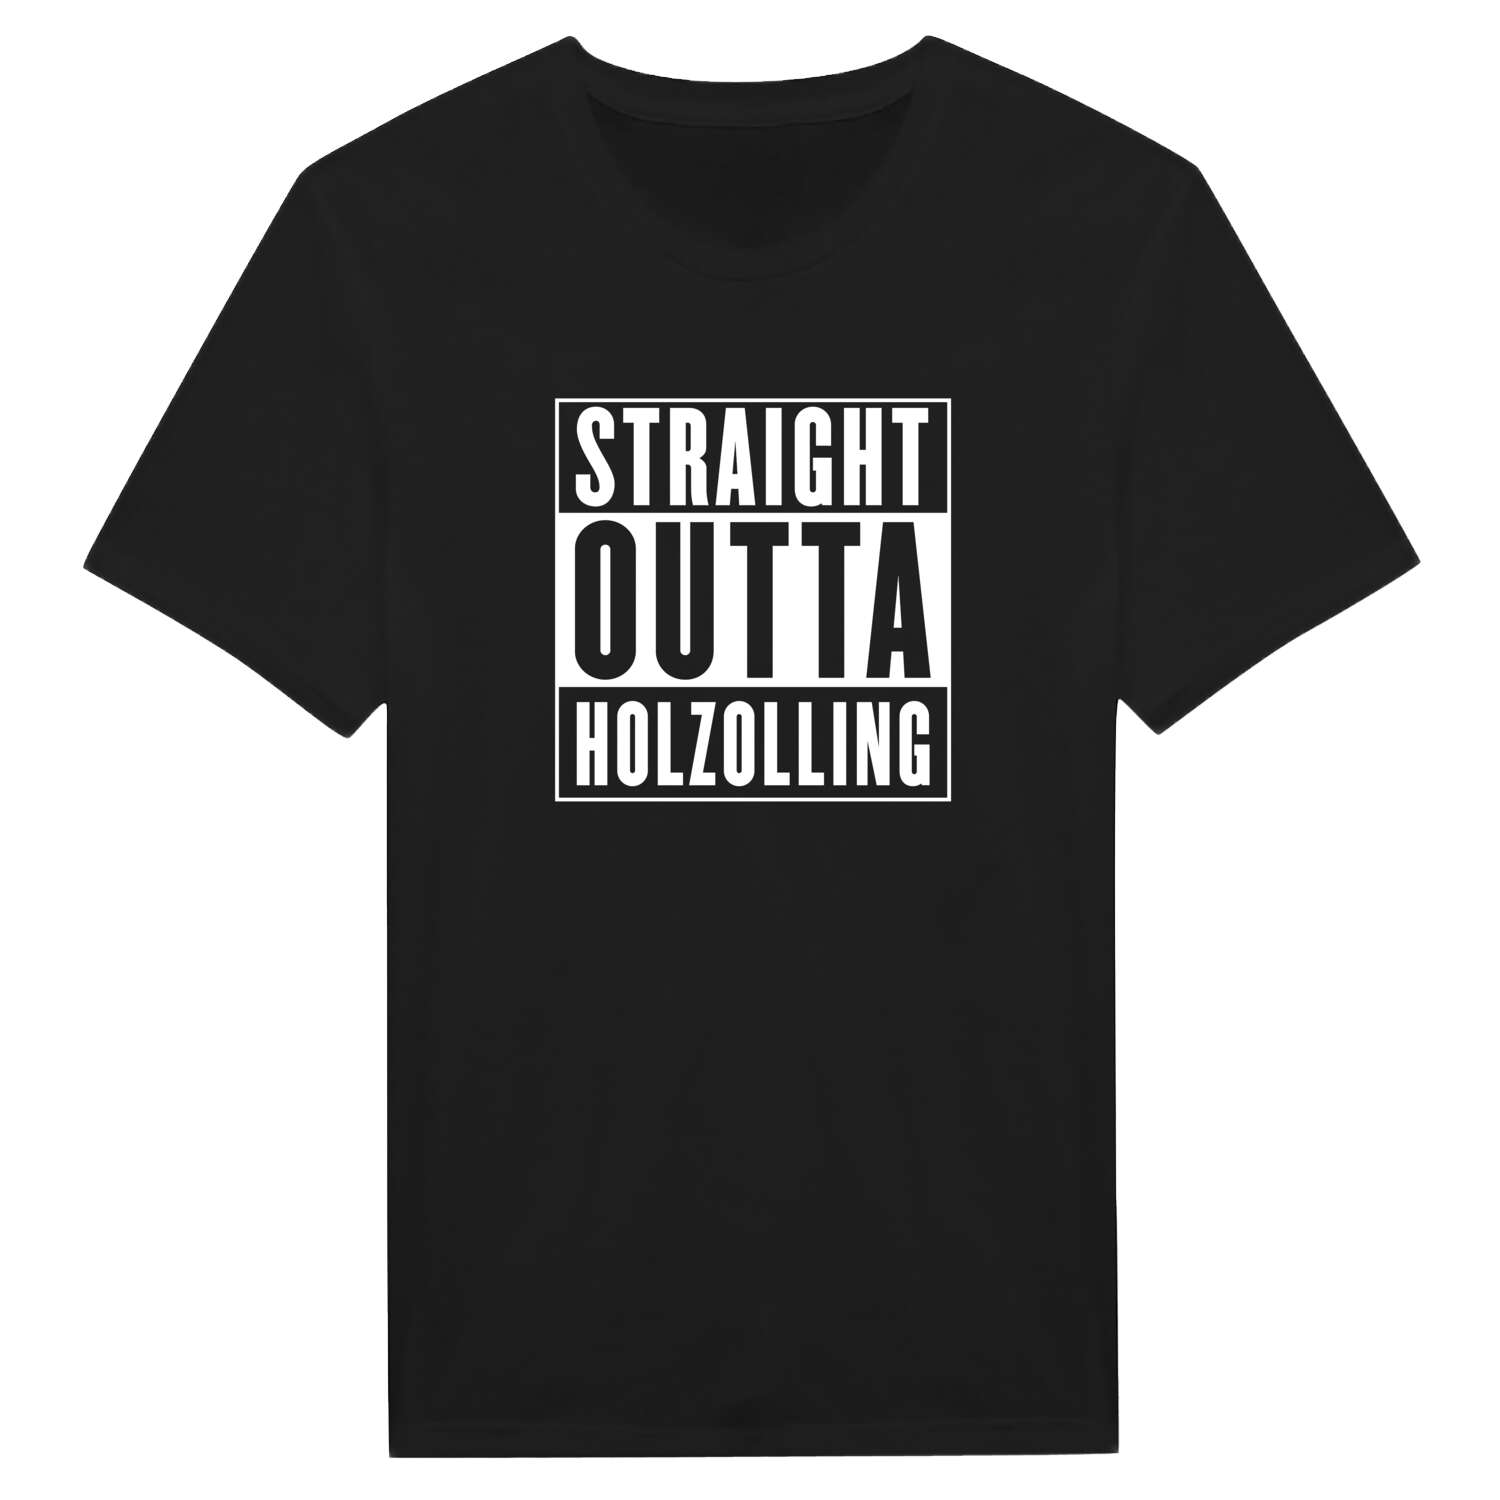 Holzolling T-Shirt »Straight Outta«